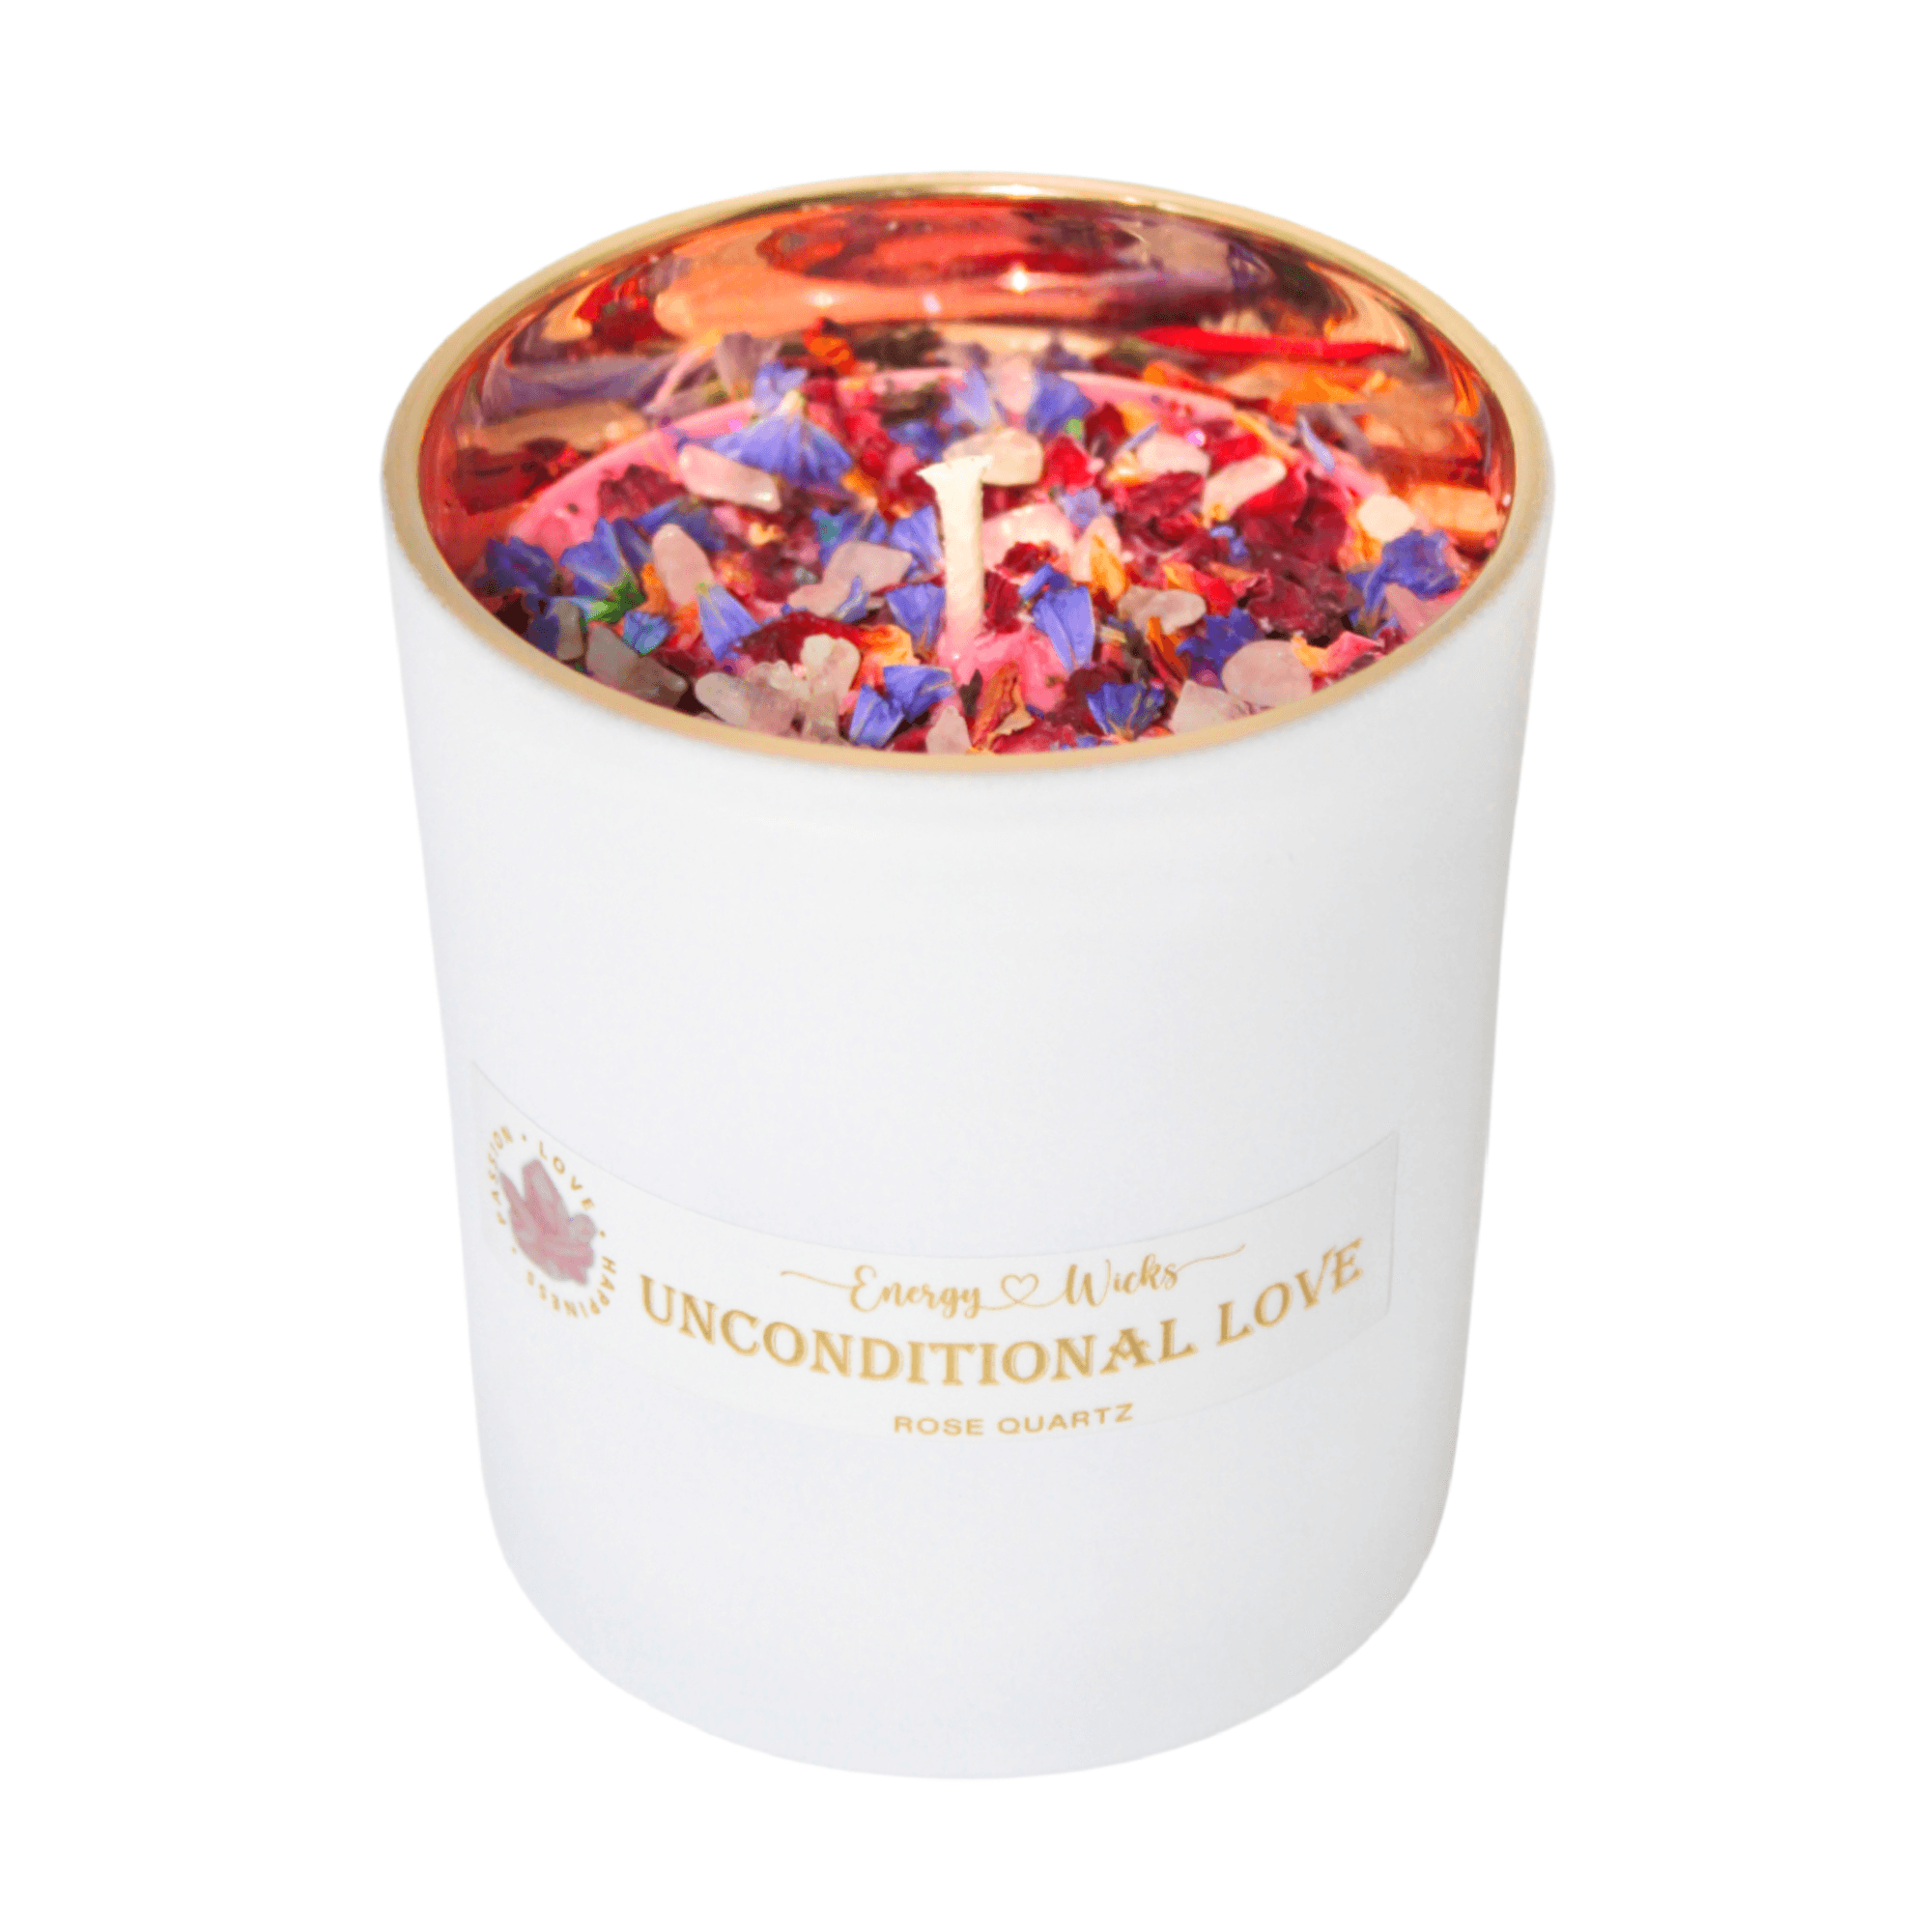 Unconditional Love Candle